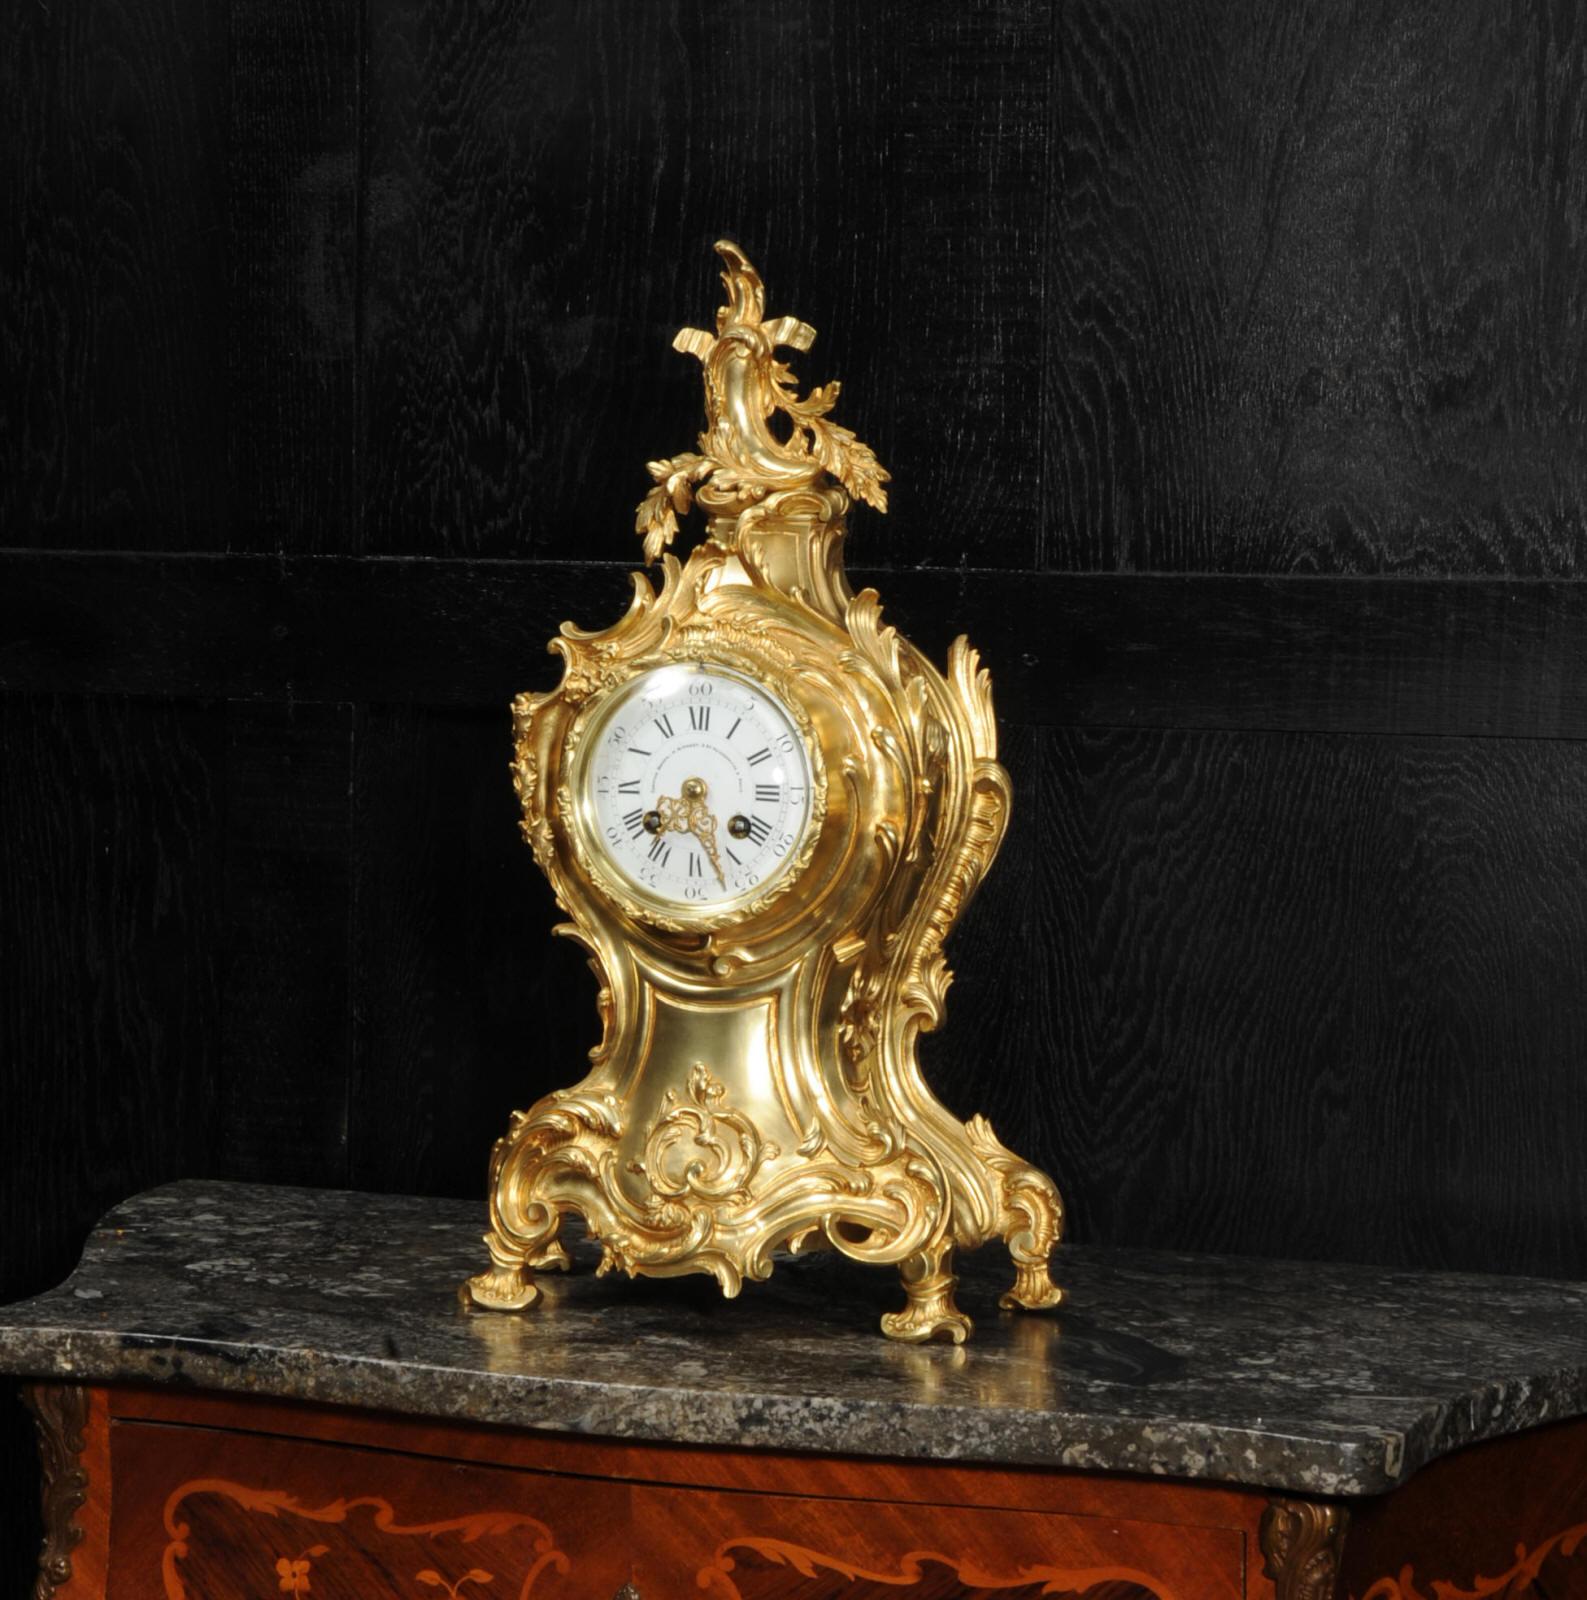 A large and stunning original antique French clock by Louis Japy and retailed by Maison Henri Riondet of Paris. Boldly modelled waisted balloon shaped case, lavished with fine, asymmetric, scrolls and acanthus. To the top, a Rococo flourish.
The